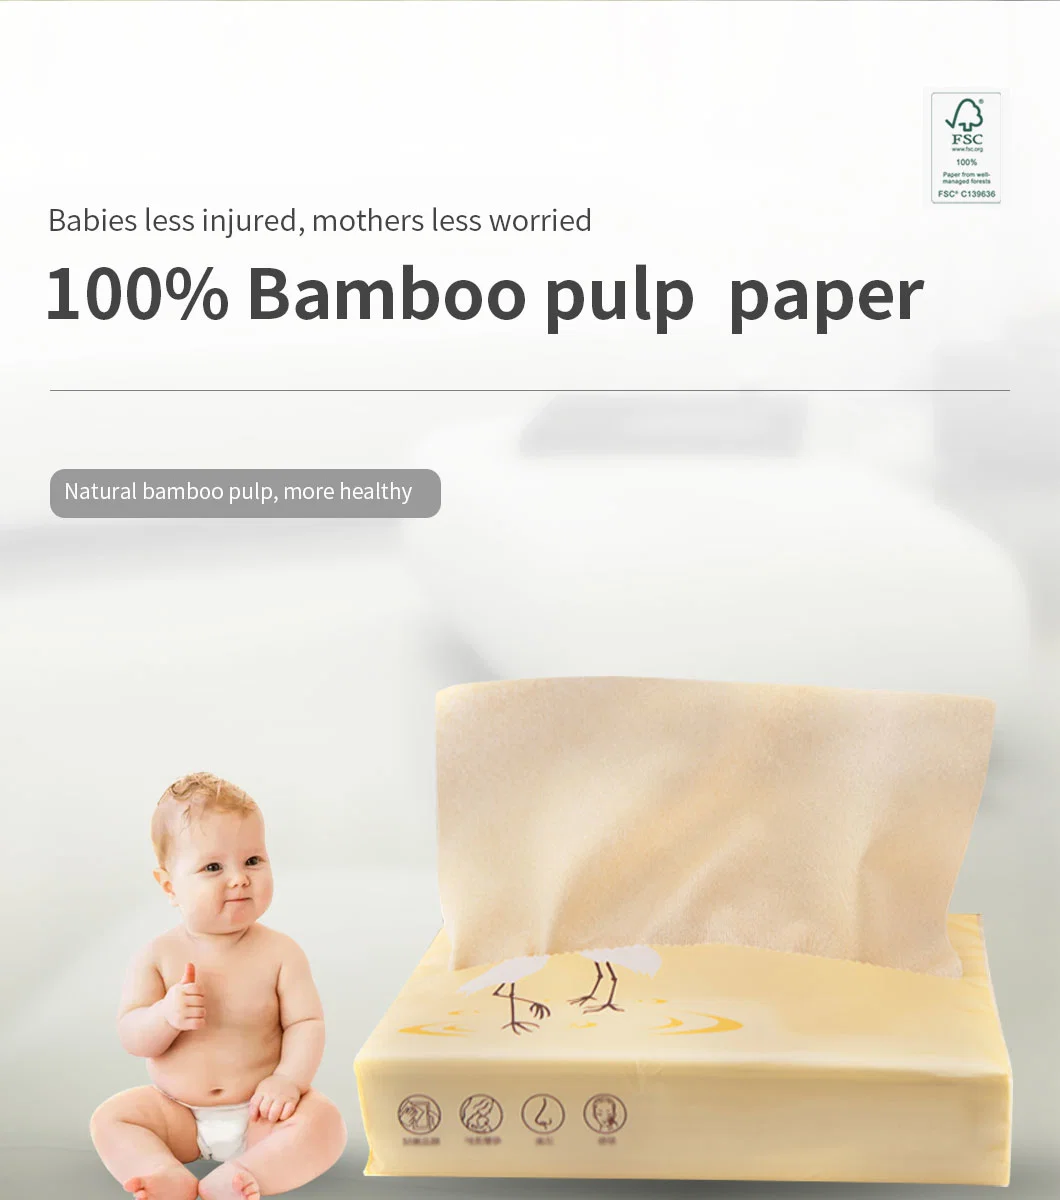 Baby Care Bamboo Facial Paper/Towel, Ultra Super Safe Biodegradable Bath Tissue/Towel, Eco Friendly Soft 2-3 Ply Sheets, 120 Counts Special Formula OEM Accpted